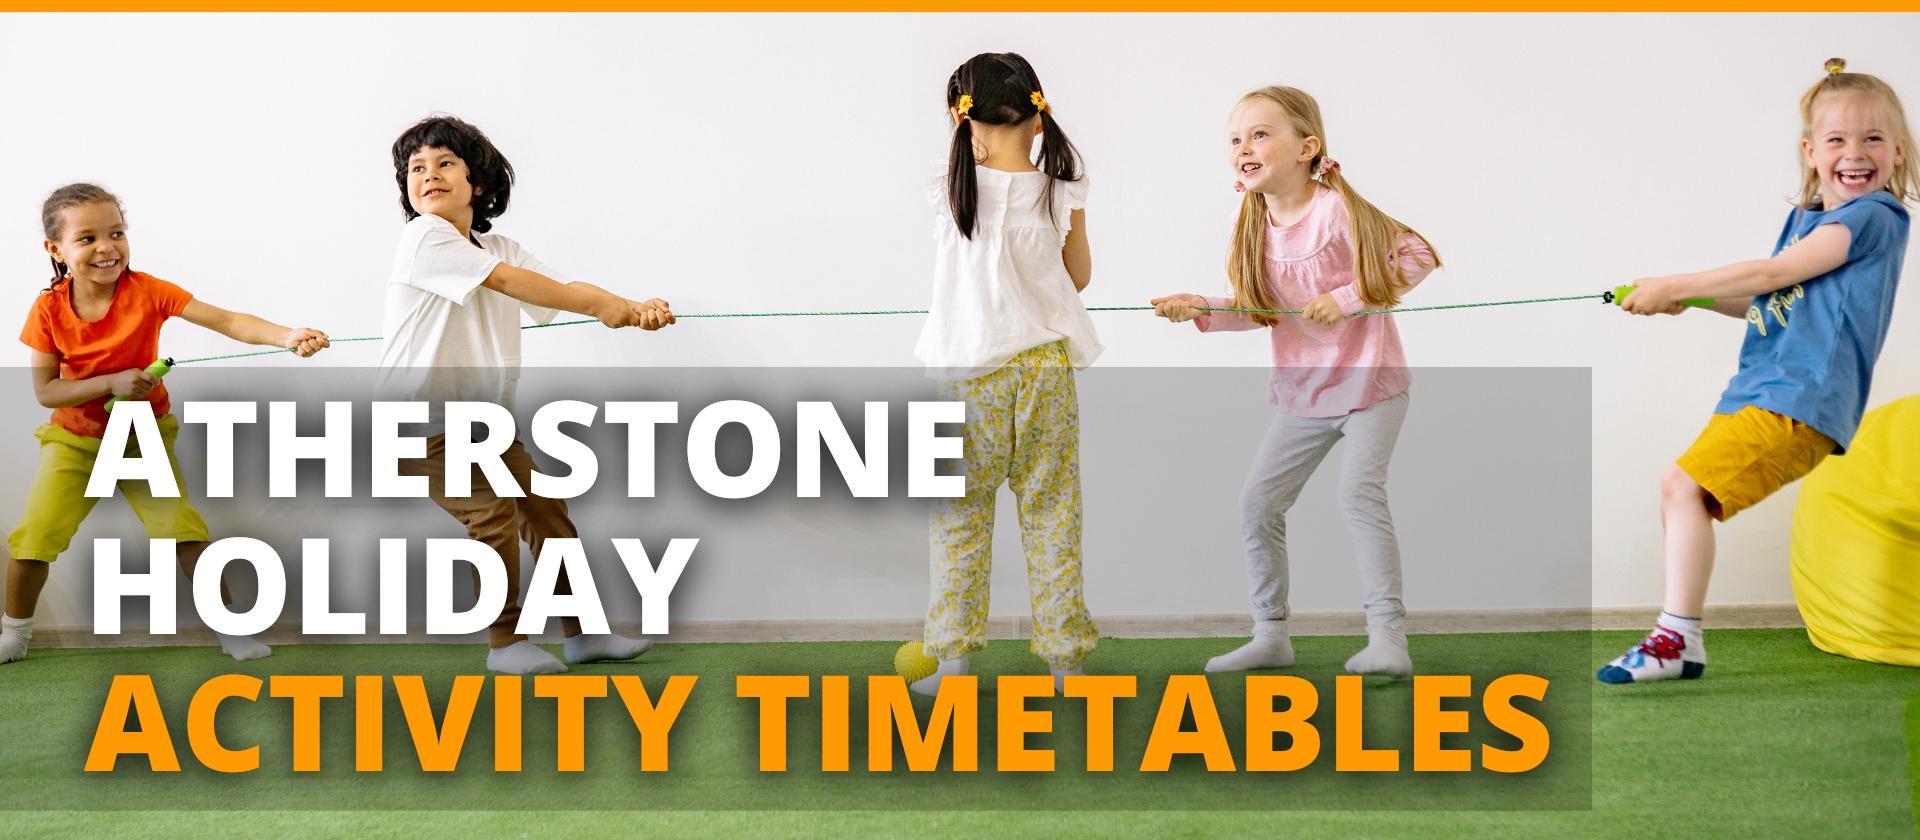 North Warwickshire leisure, Atherstone childrens holiday activity timetables